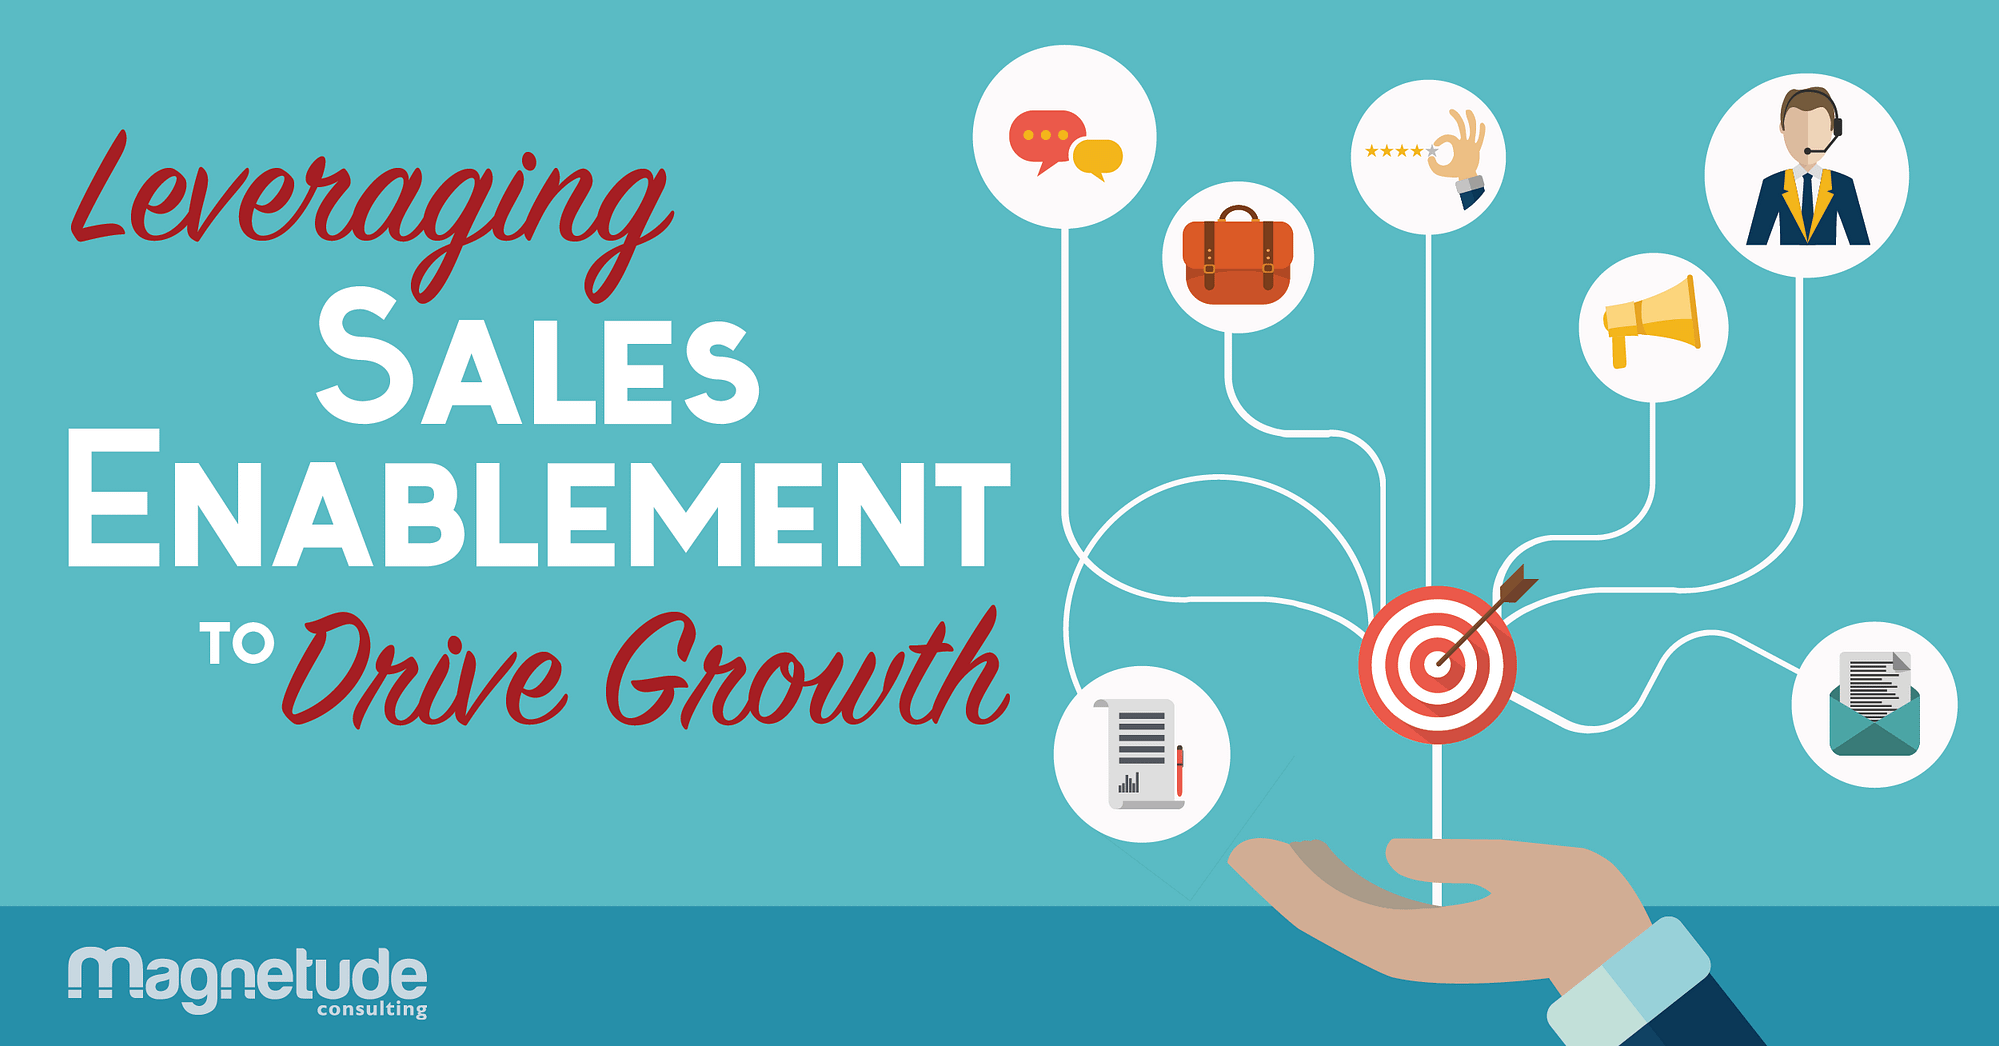 Leveraging B2B Marketing Sales Enablement to Drive Growth